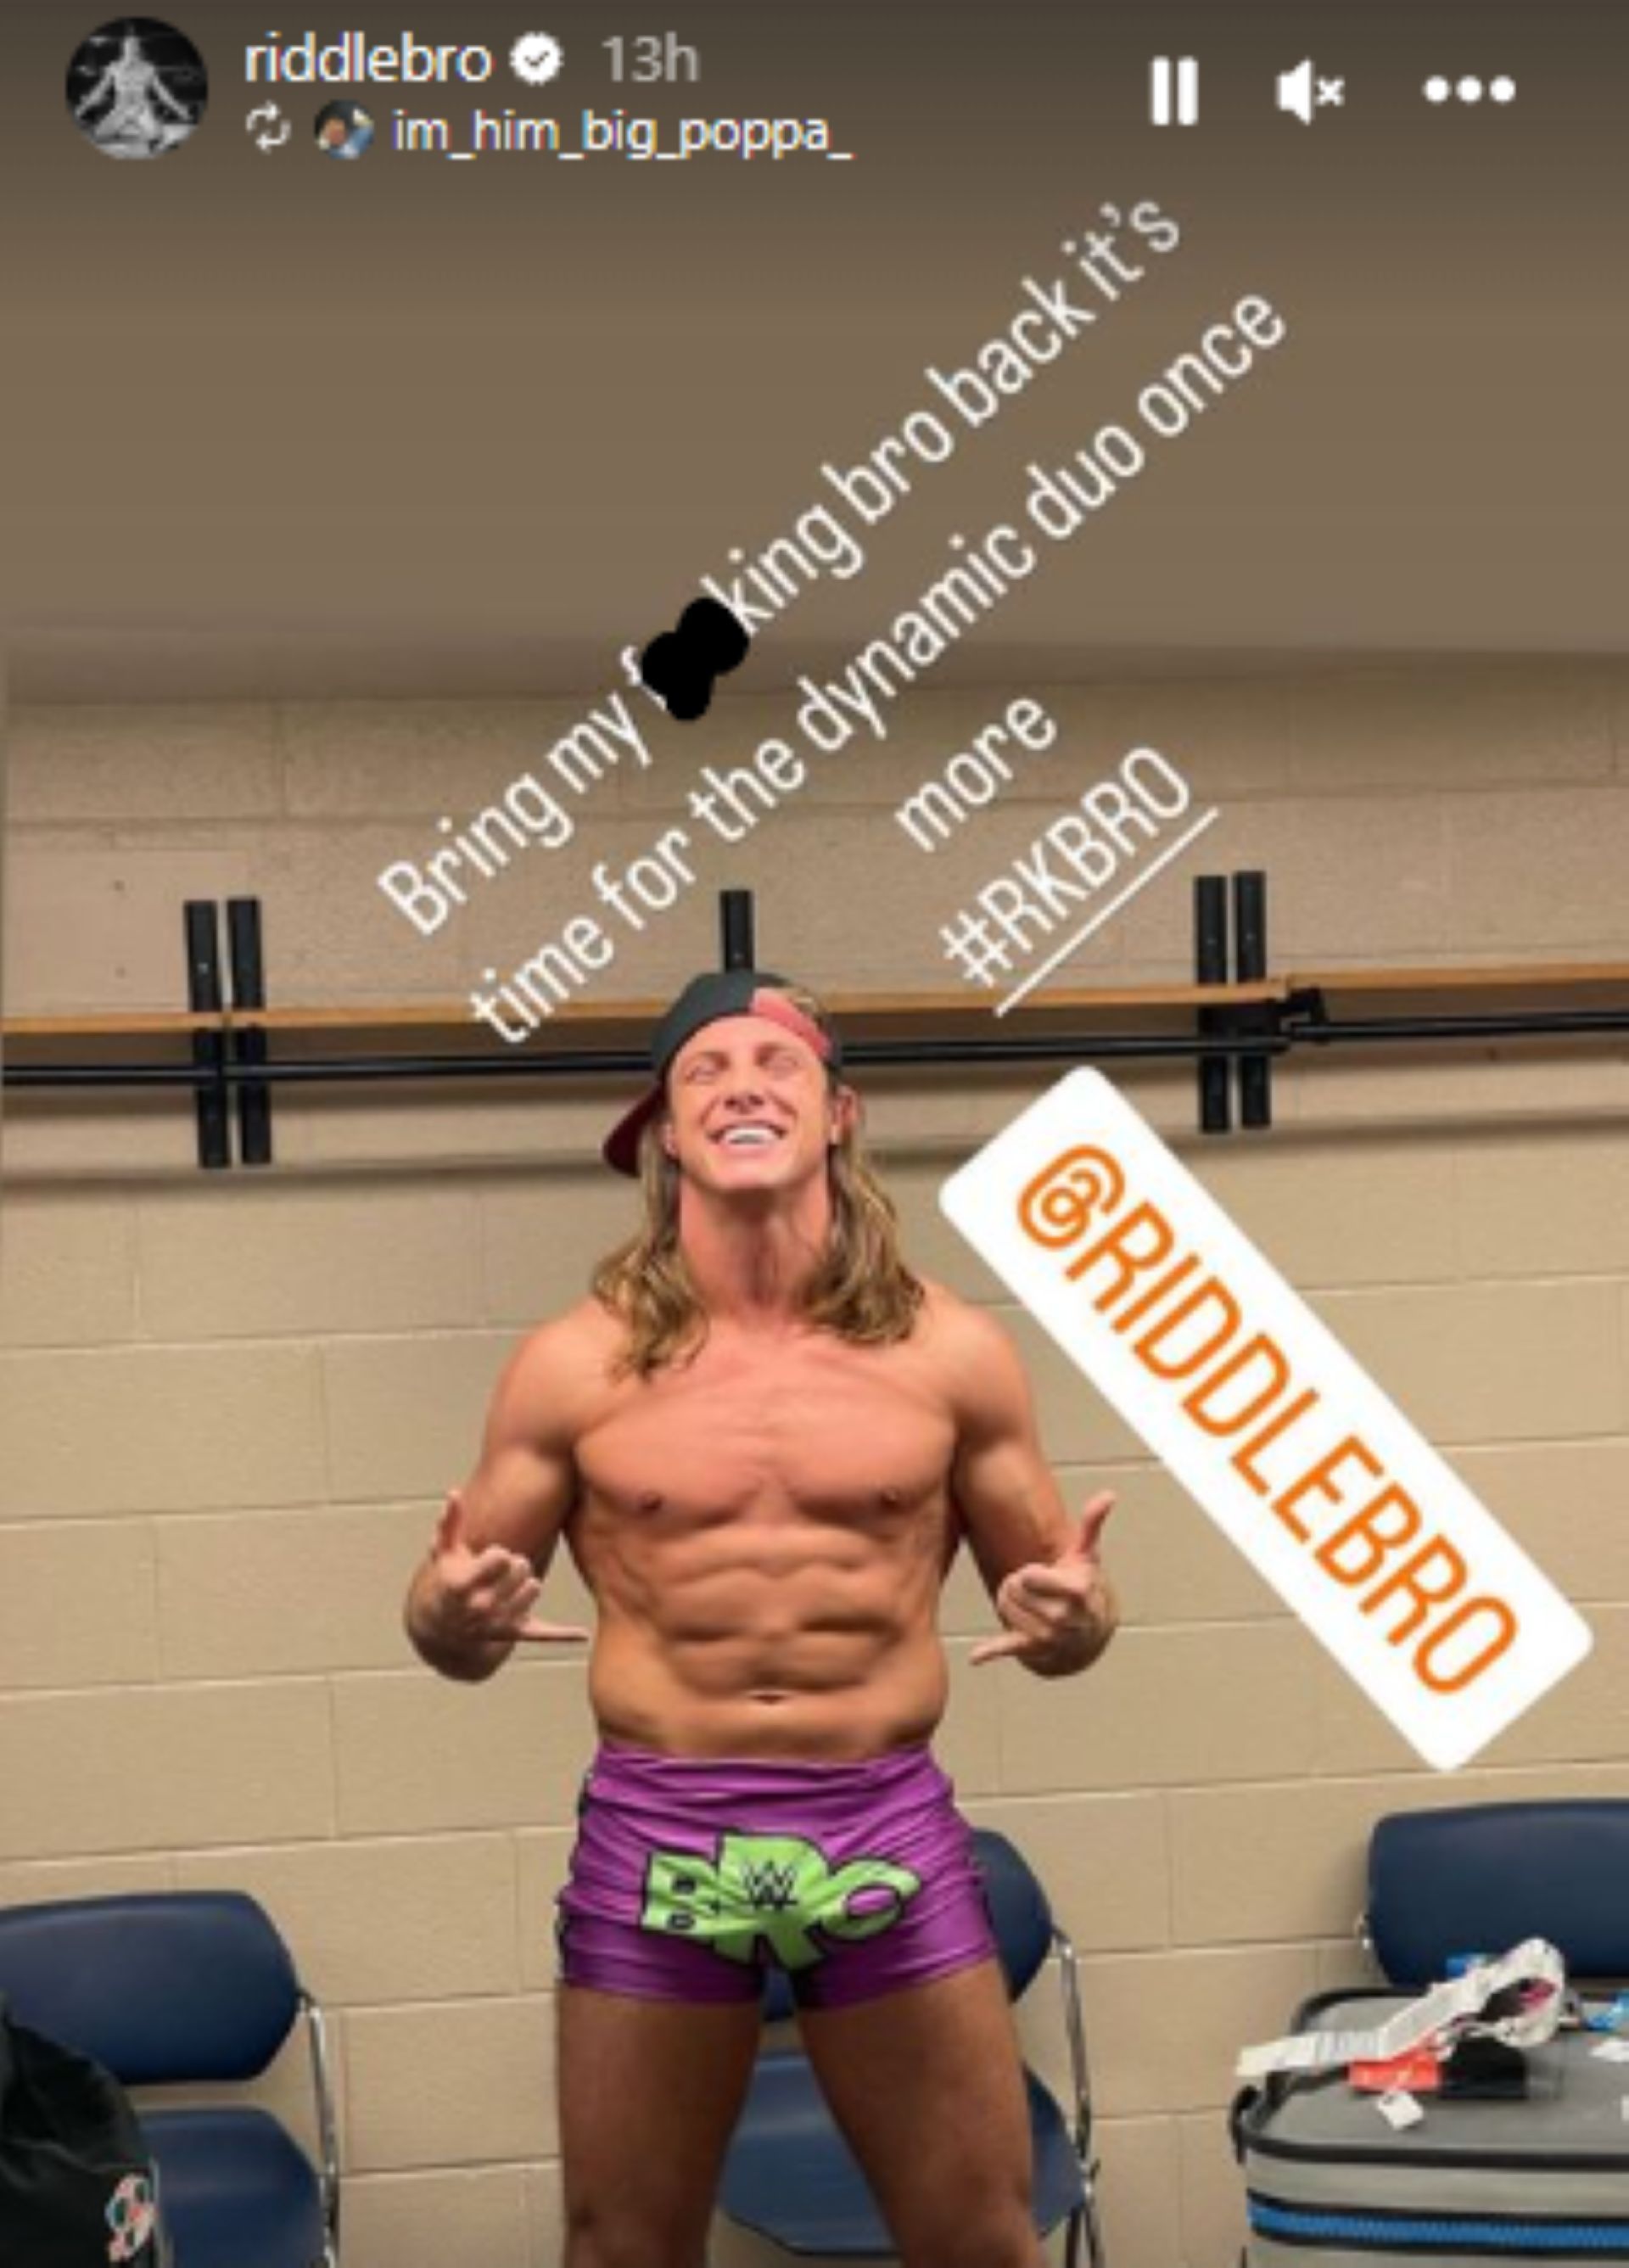 Matt Riddle reposts a post of someone saying they want RK-Bros to reunite